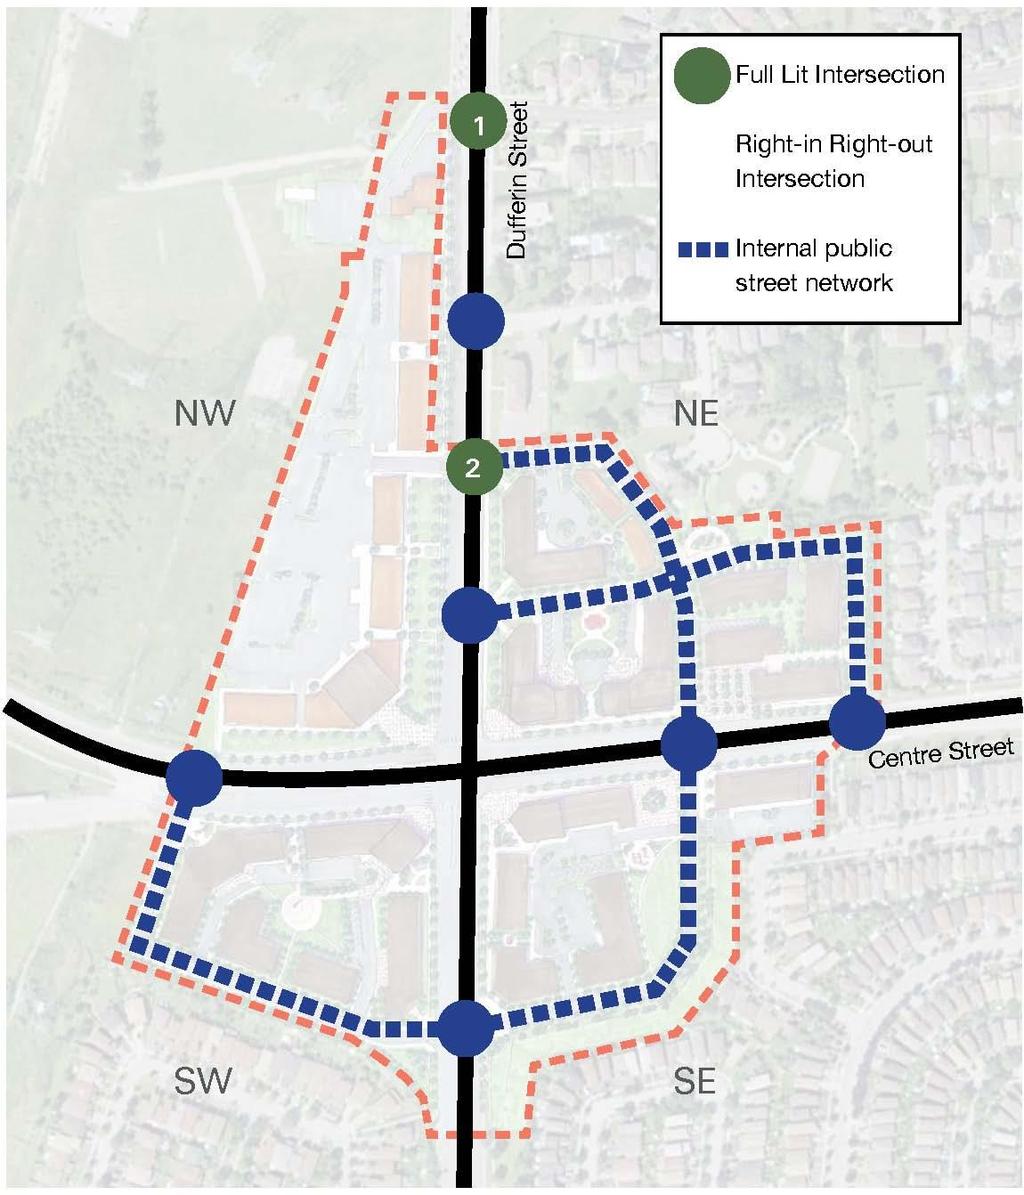 Figure 13: Access Points and Roads Demonstration Concept Network Further Study Area Further Study Area Subject to evaluation as a full movement intersection through a Tertiary Plan The Street